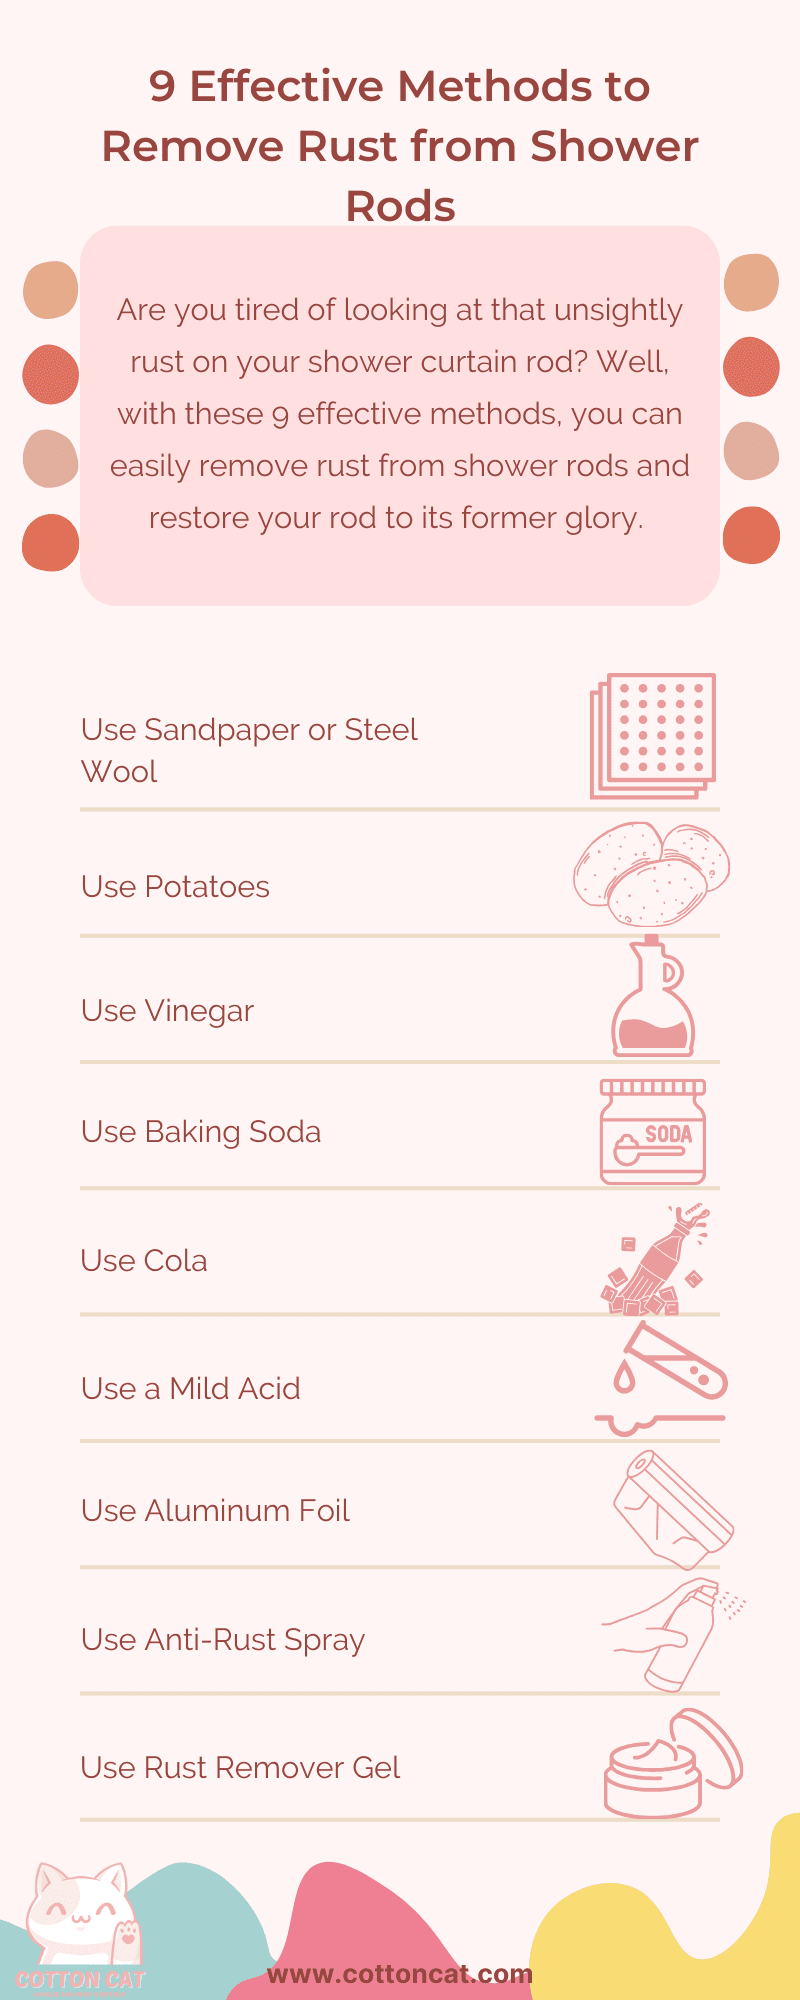 An infographic of 9 effective methods to remove rust from shower rods.